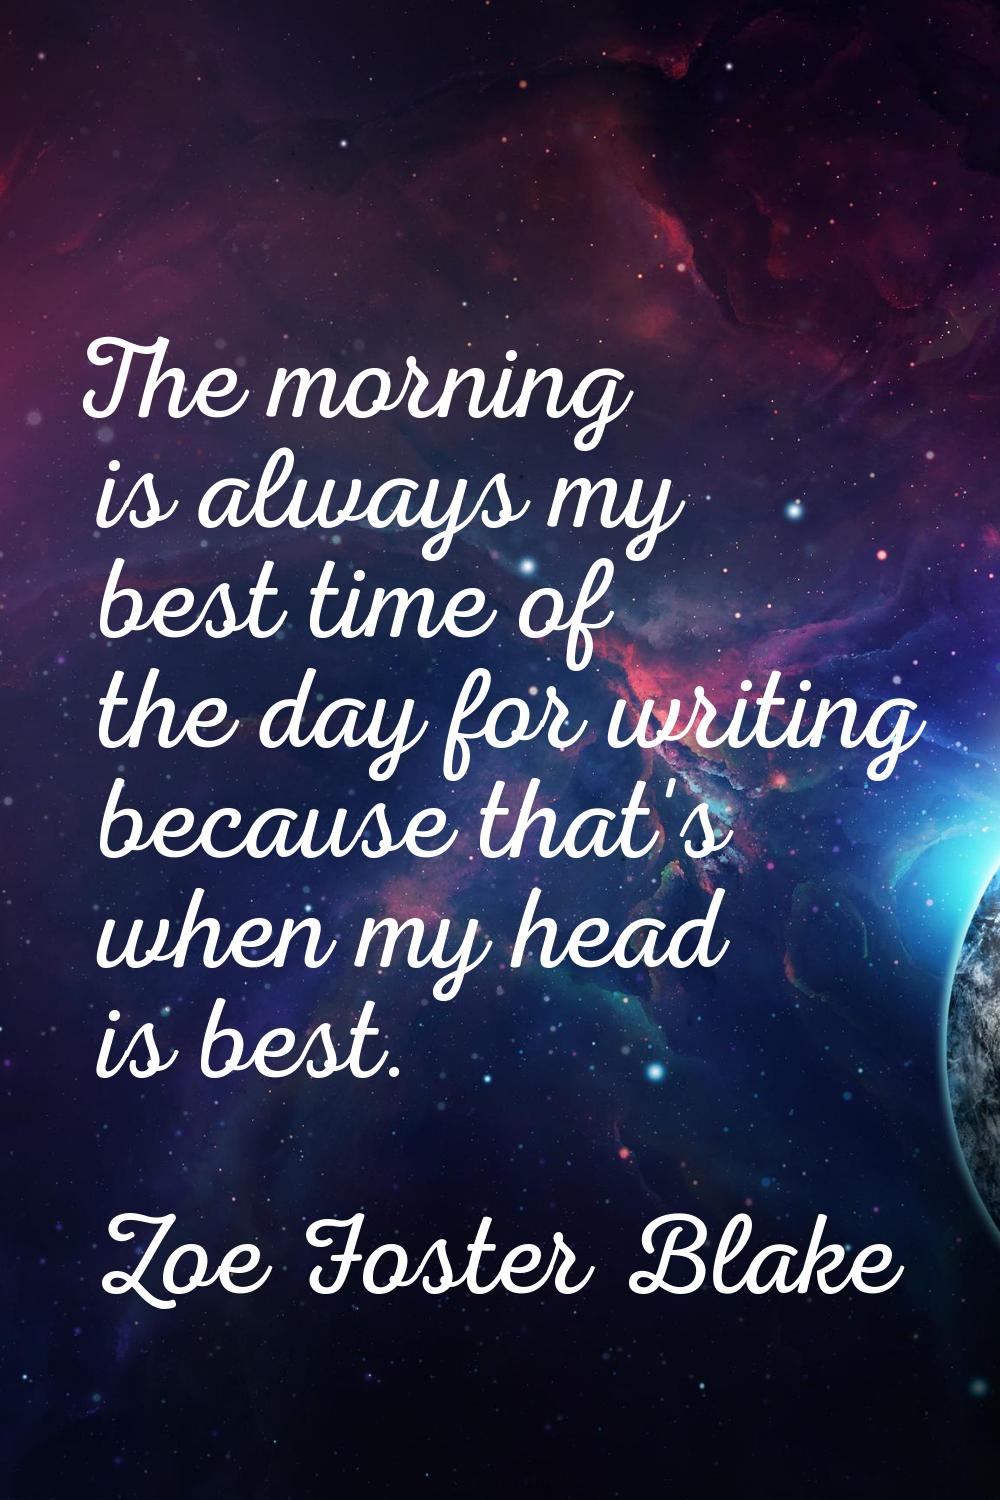 The morning is always my best time of the day for writing because that's when my head is best.